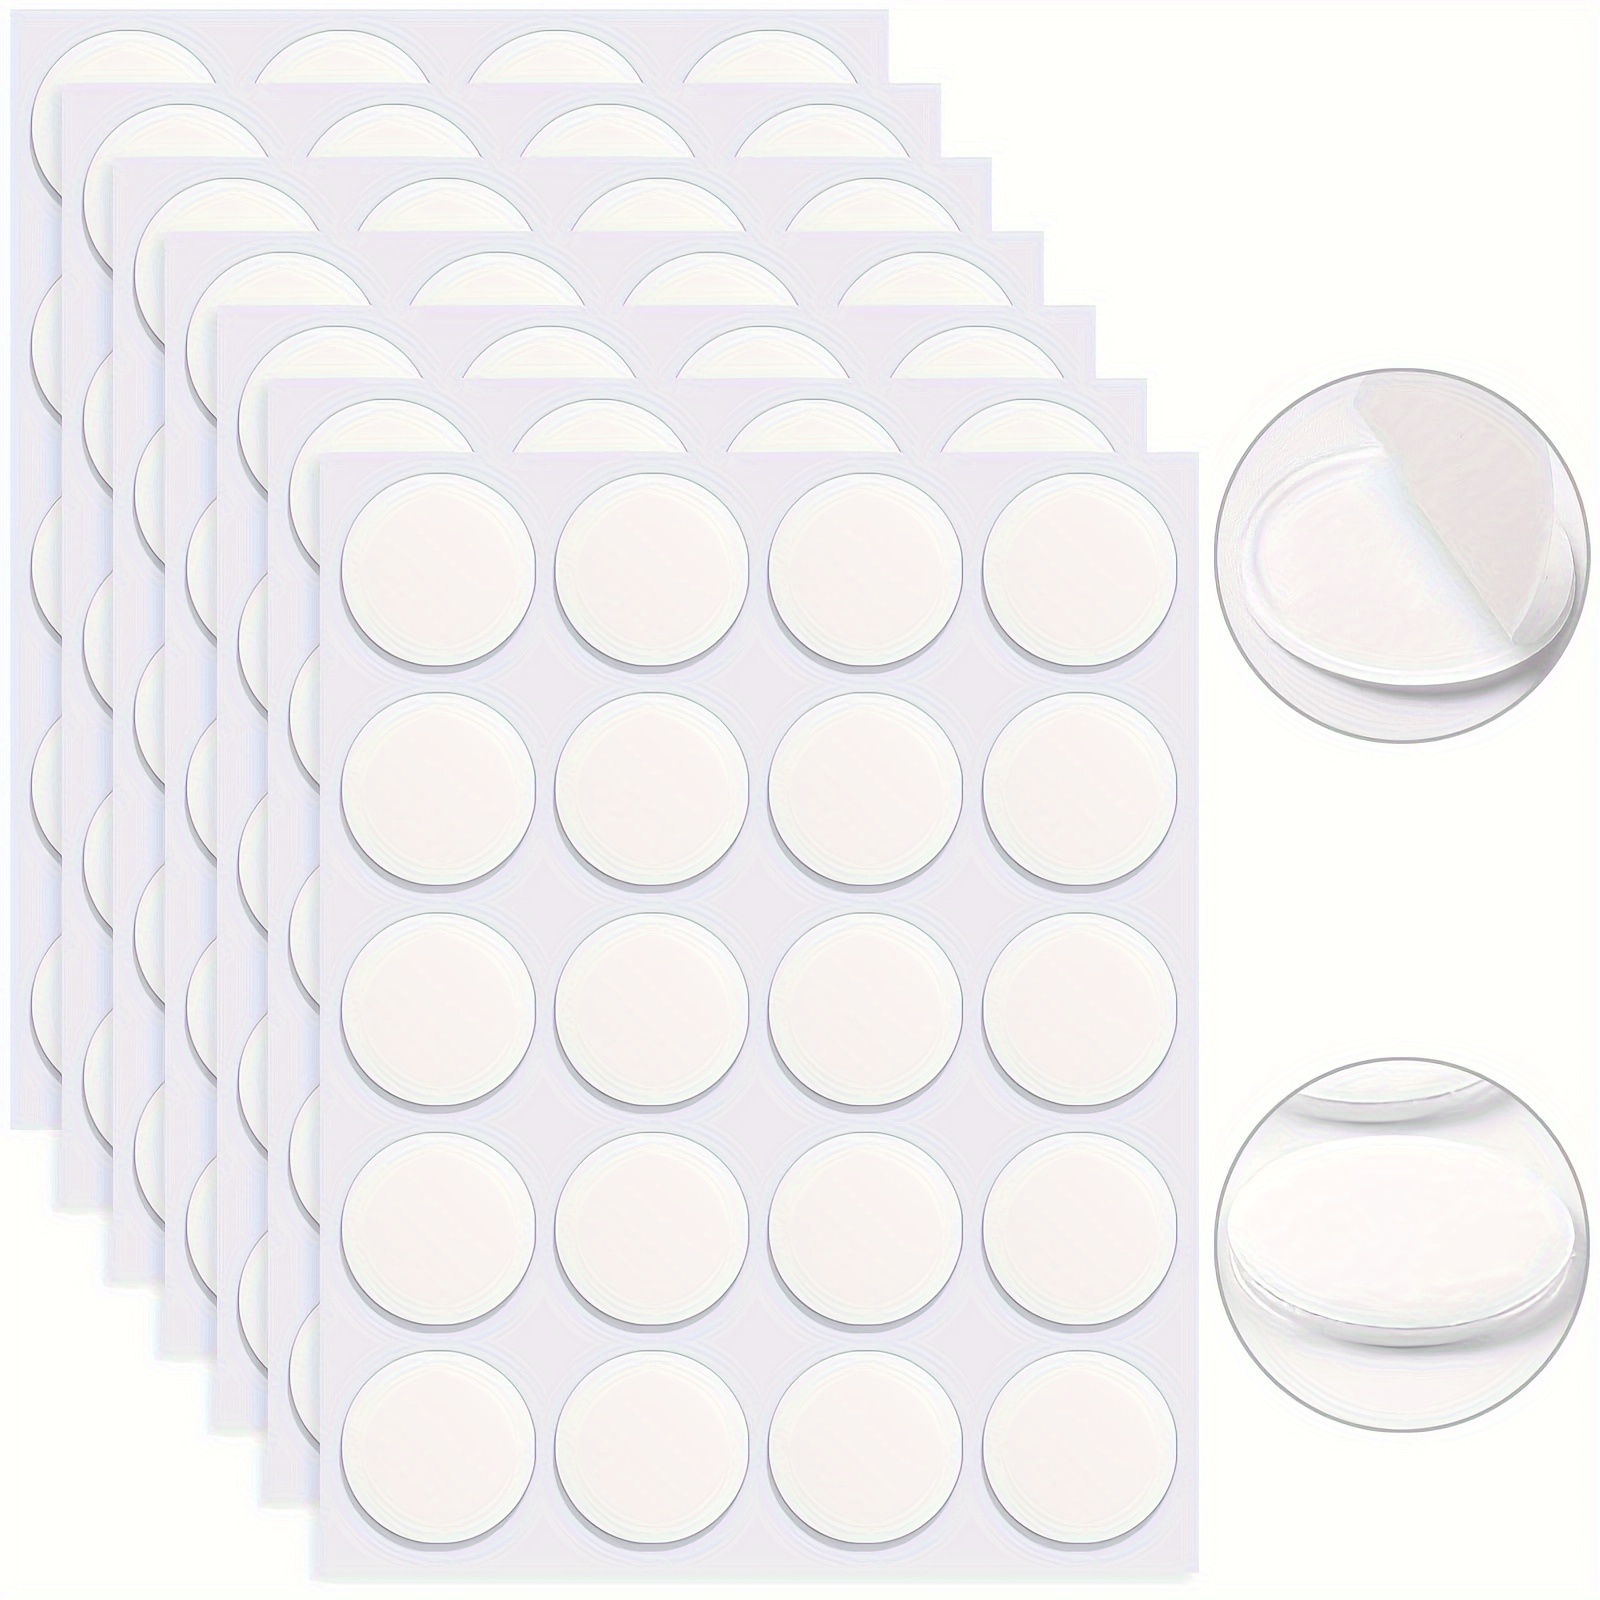 Sticky Tack Reusable Removable Adhesive No Damage Round Putty Poster Dots